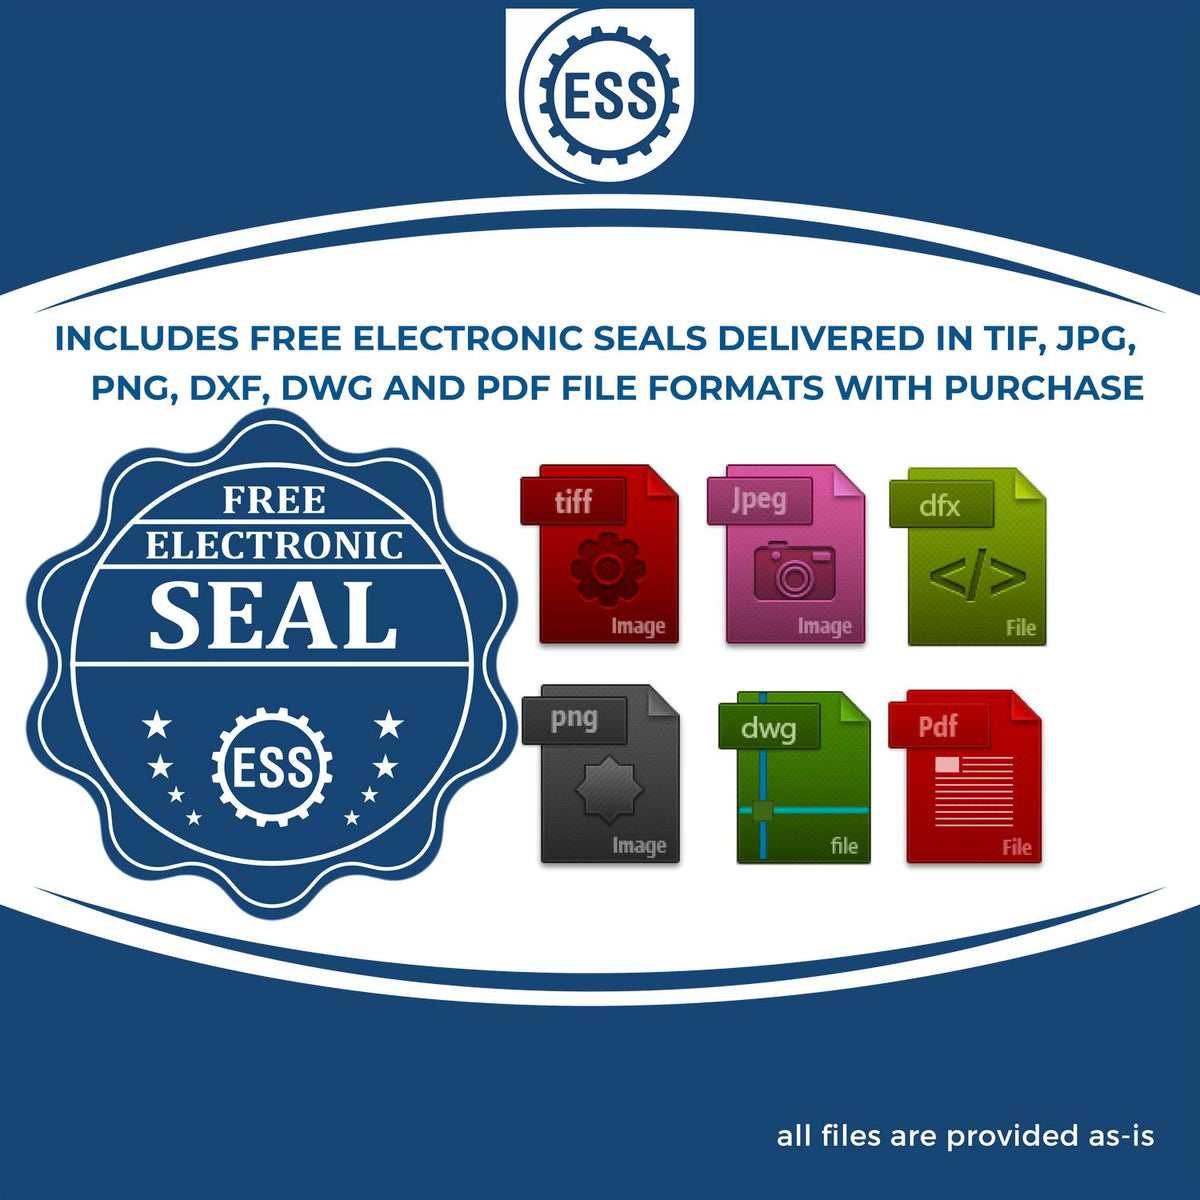 An infographic for the free electronic seal for the Self-Inking South Carolina Landscape Architect Stamp illustrating the different file type icons such as DXF, DWG, TIF, JPG and PNG.